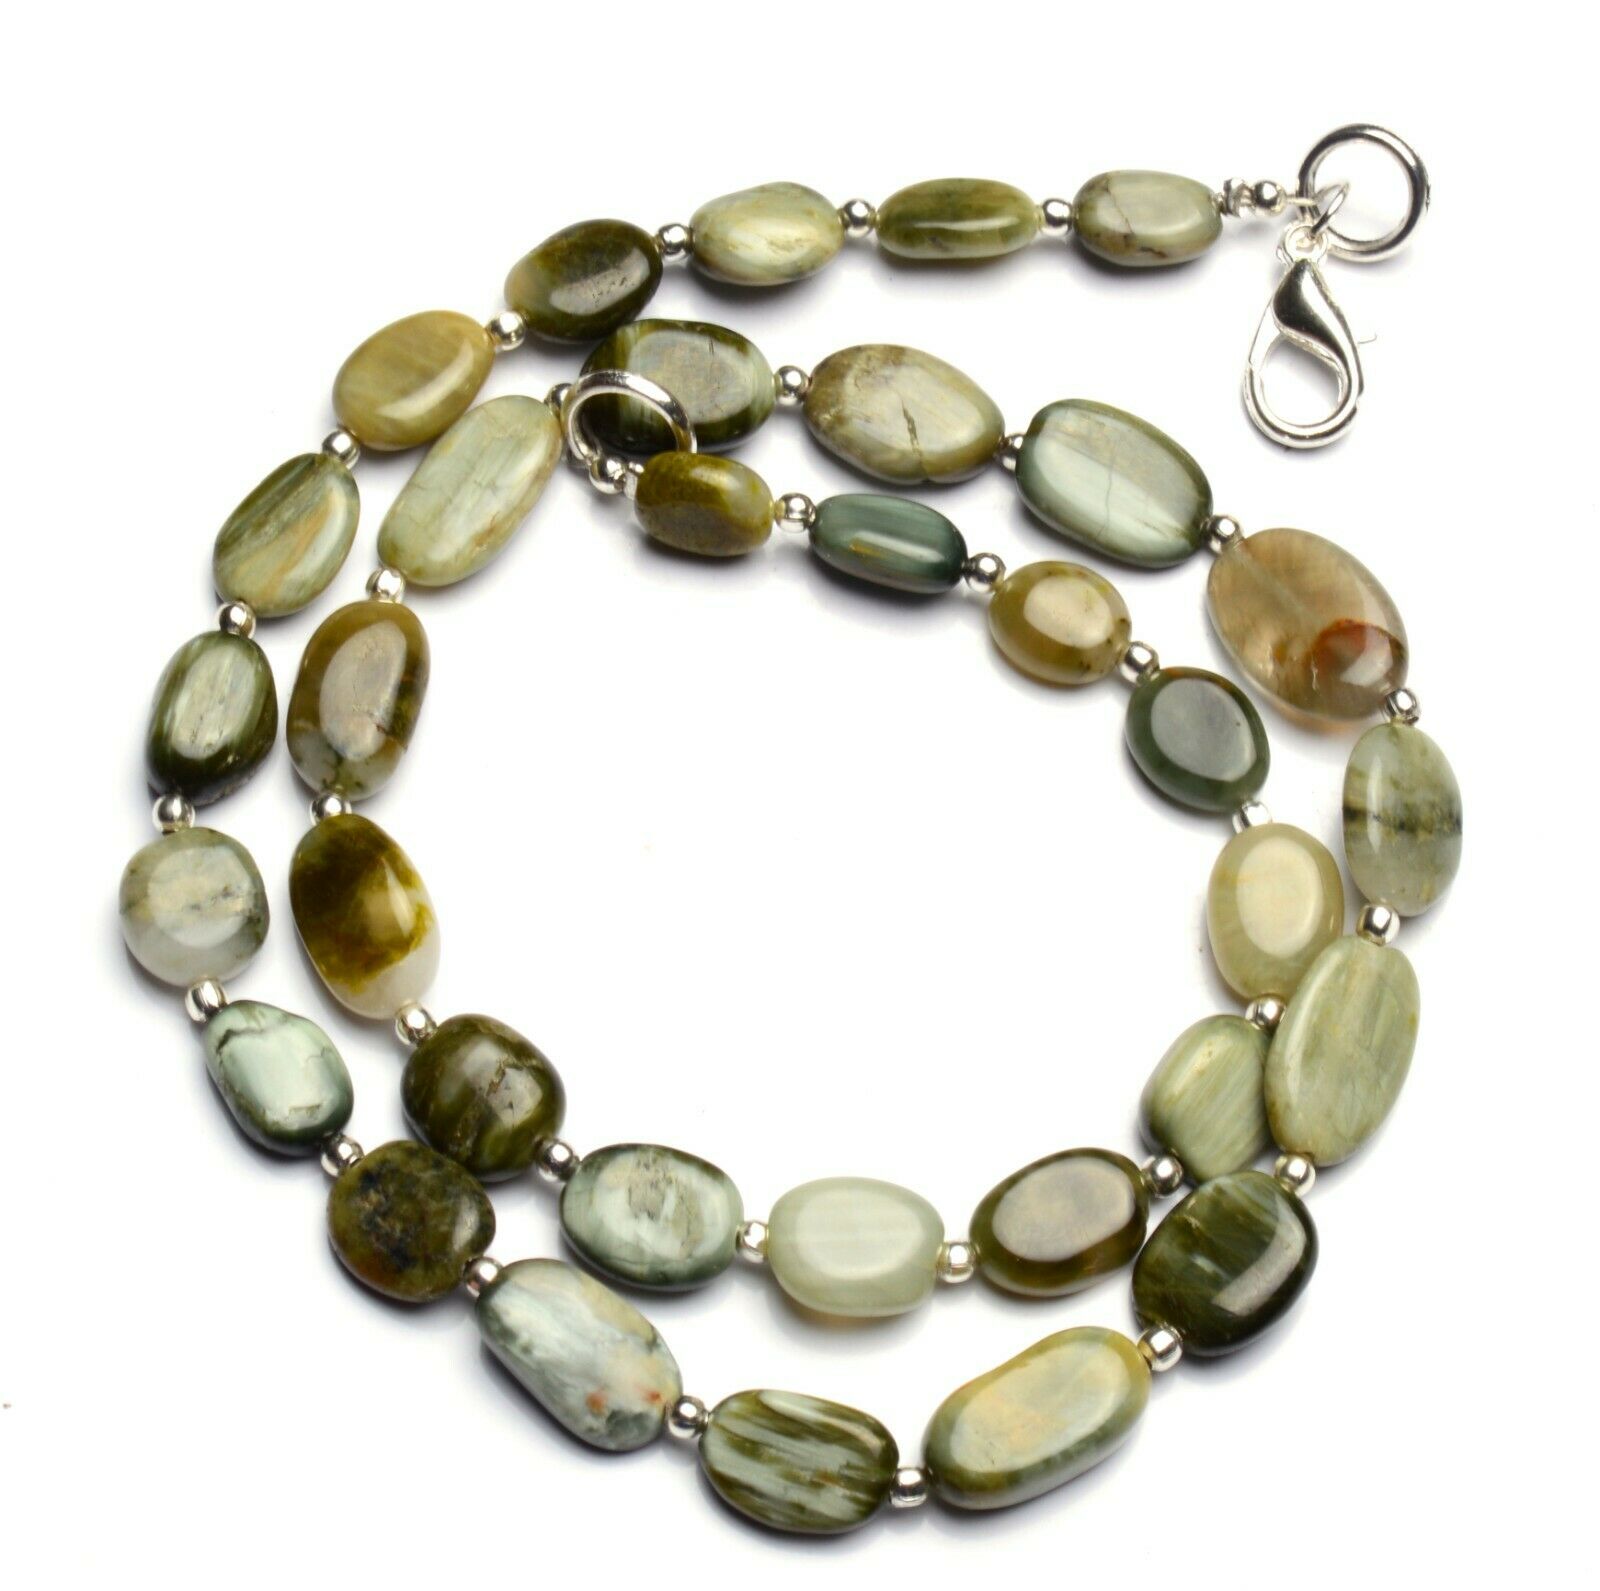 Natural Gem Chrysoberyl Cats Eye 8x6 To 13x9mm Smooth Nugget Beads Necklace 16"